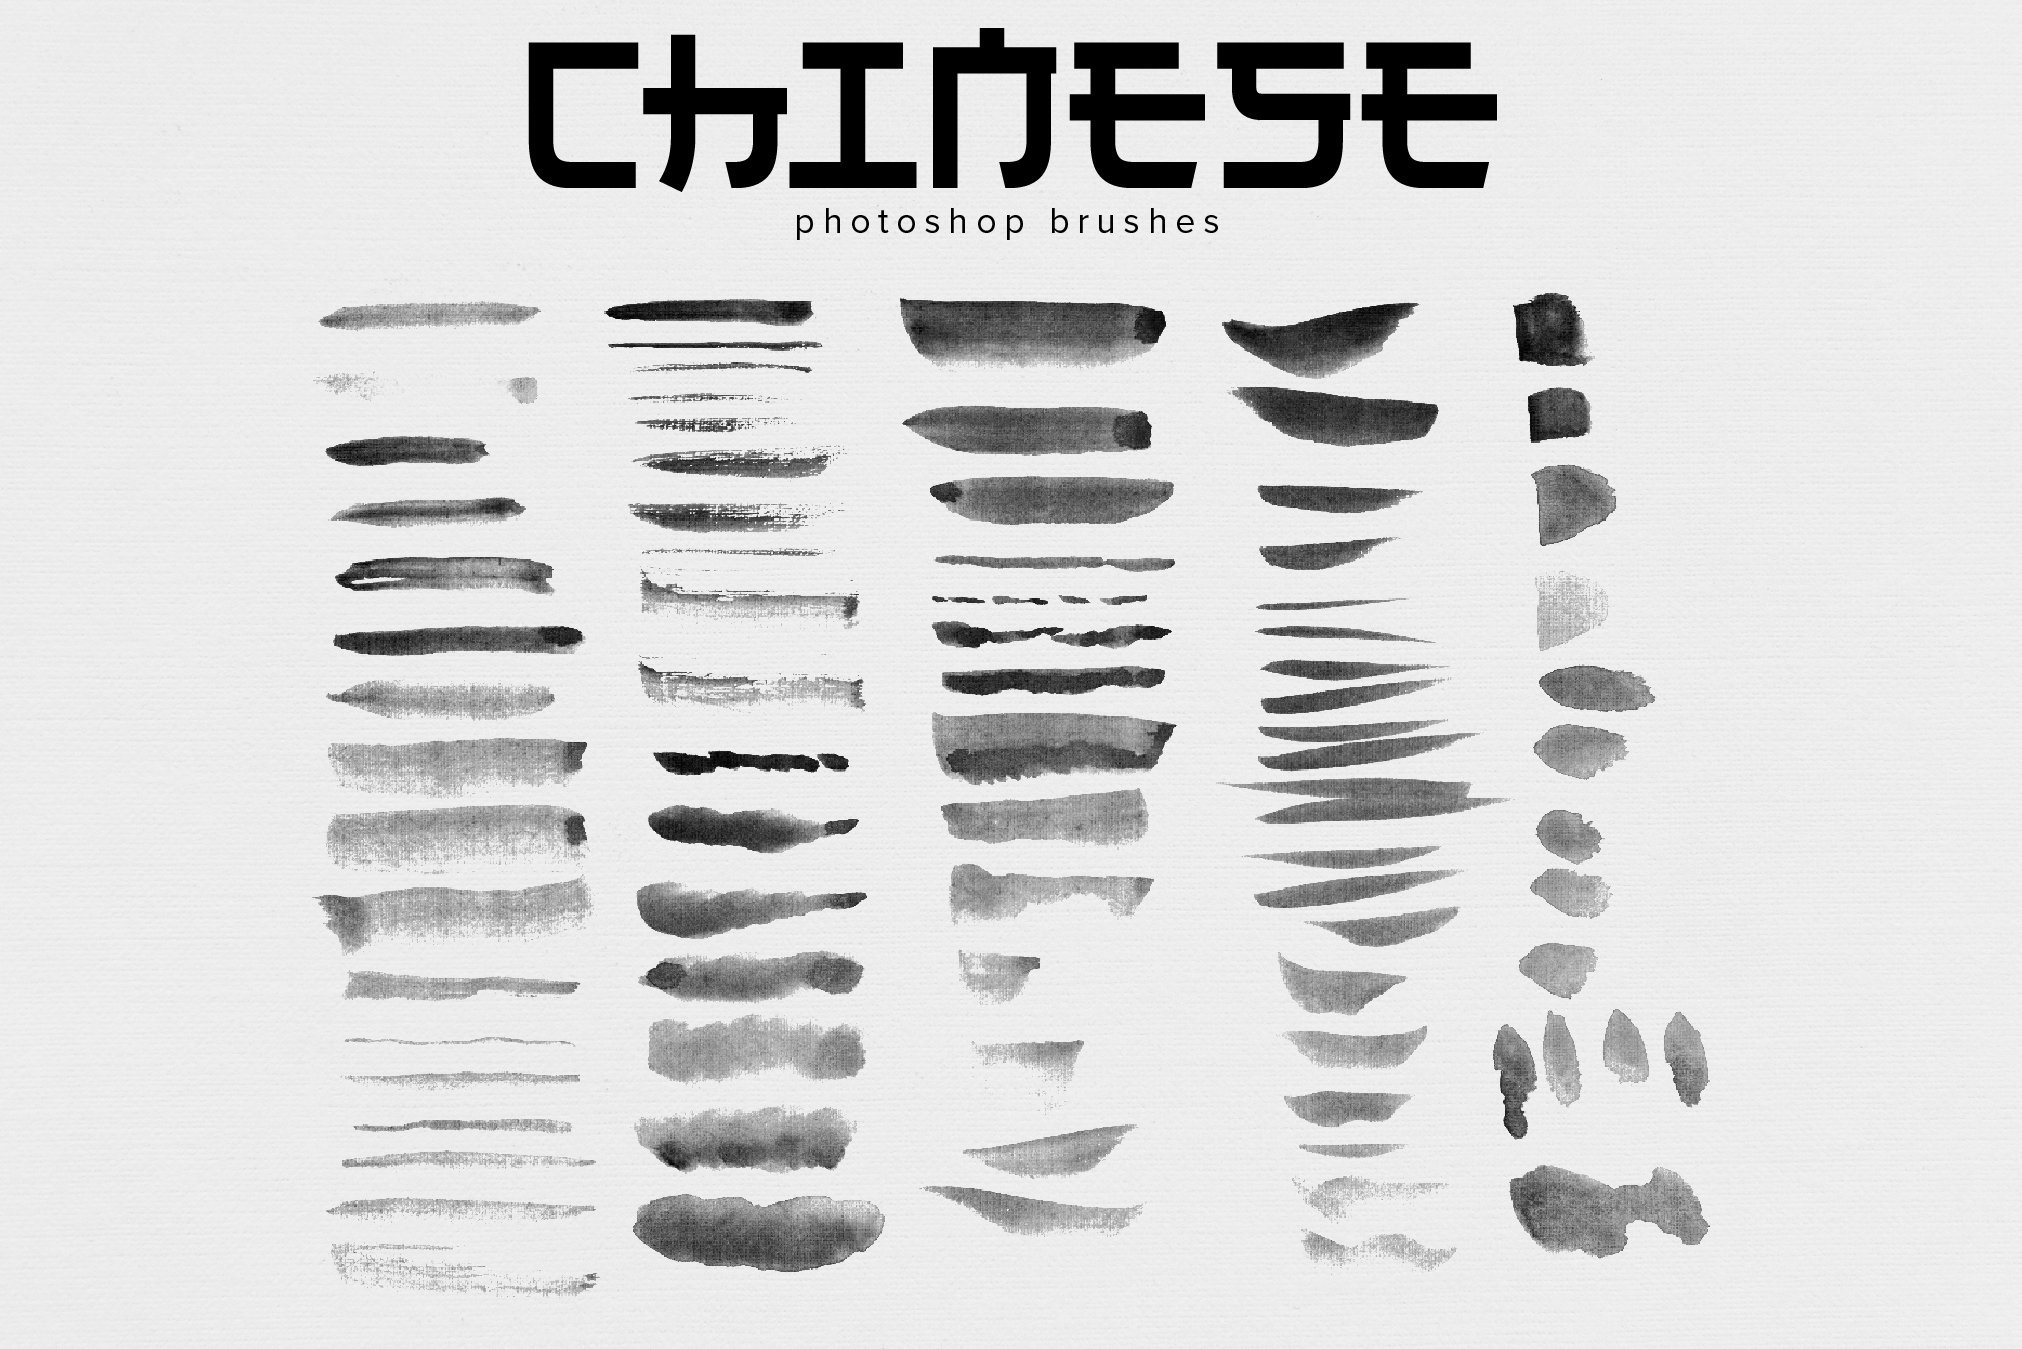 chinese artists photoshop brushes download